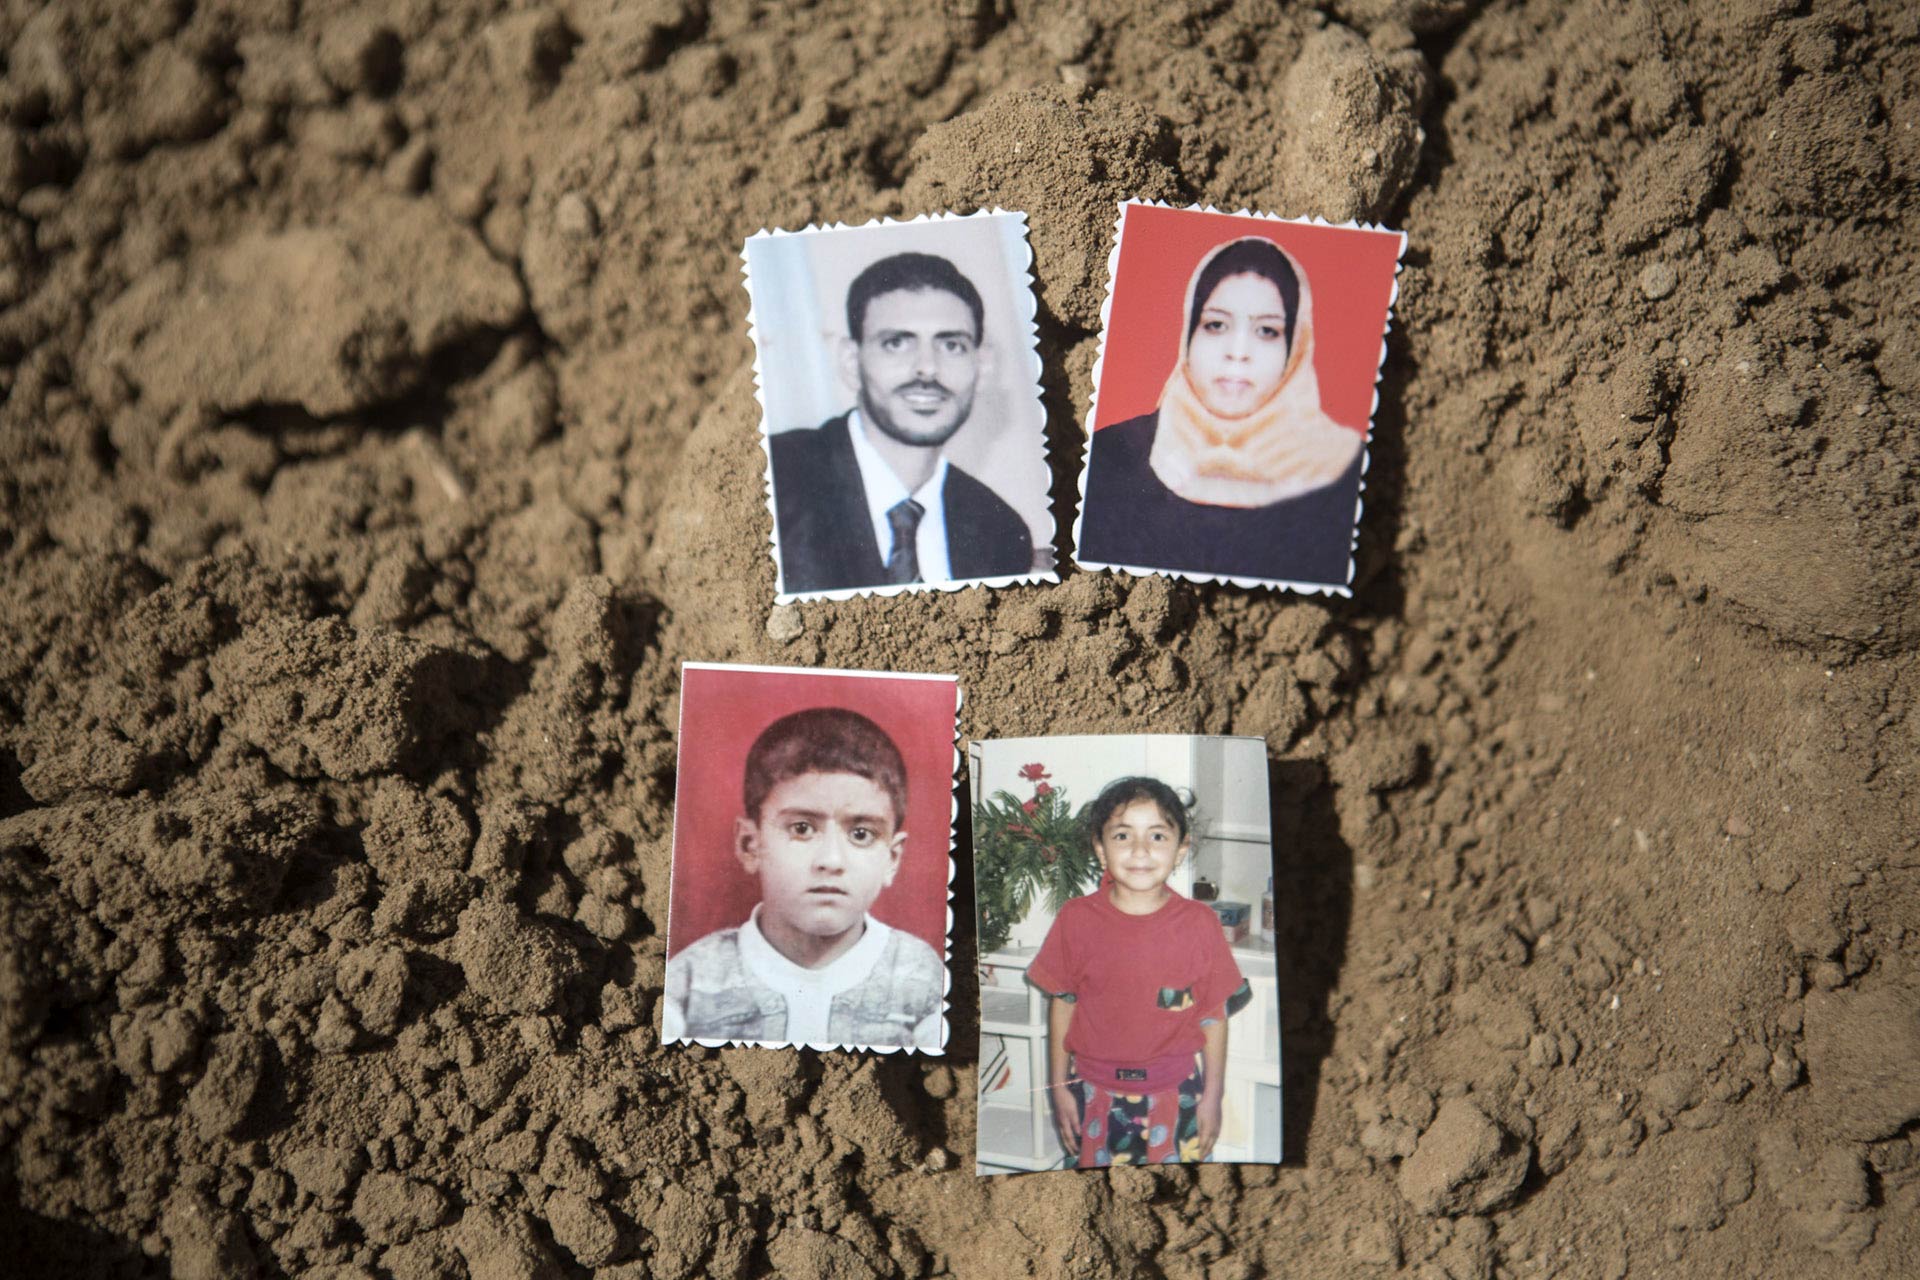 Rafat, Mustafa's son, had three little kids. Two boys, the eldest ten-year-old Mustafa, named traditionally after his grandfather, Maysara, seven years old, and a daughter named Farah, six years old. His wife Nabila was pregnant at the time of the attack. The photo of 10-year-old Mustafa is missing.
